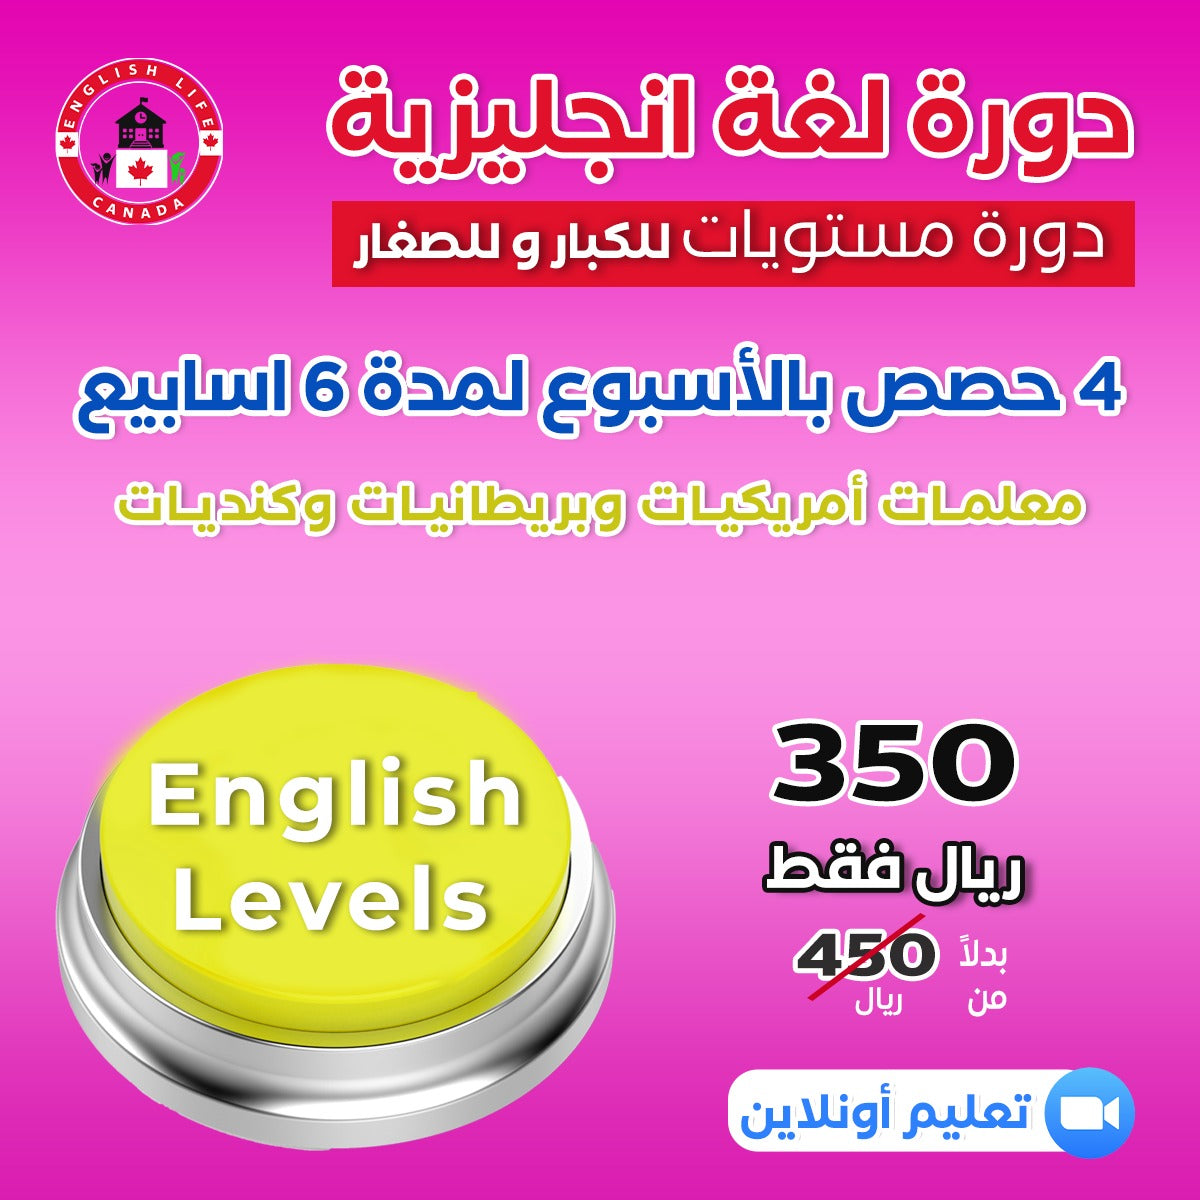 English Levels - Adults & Children - 4 classes per week for 6 weeks